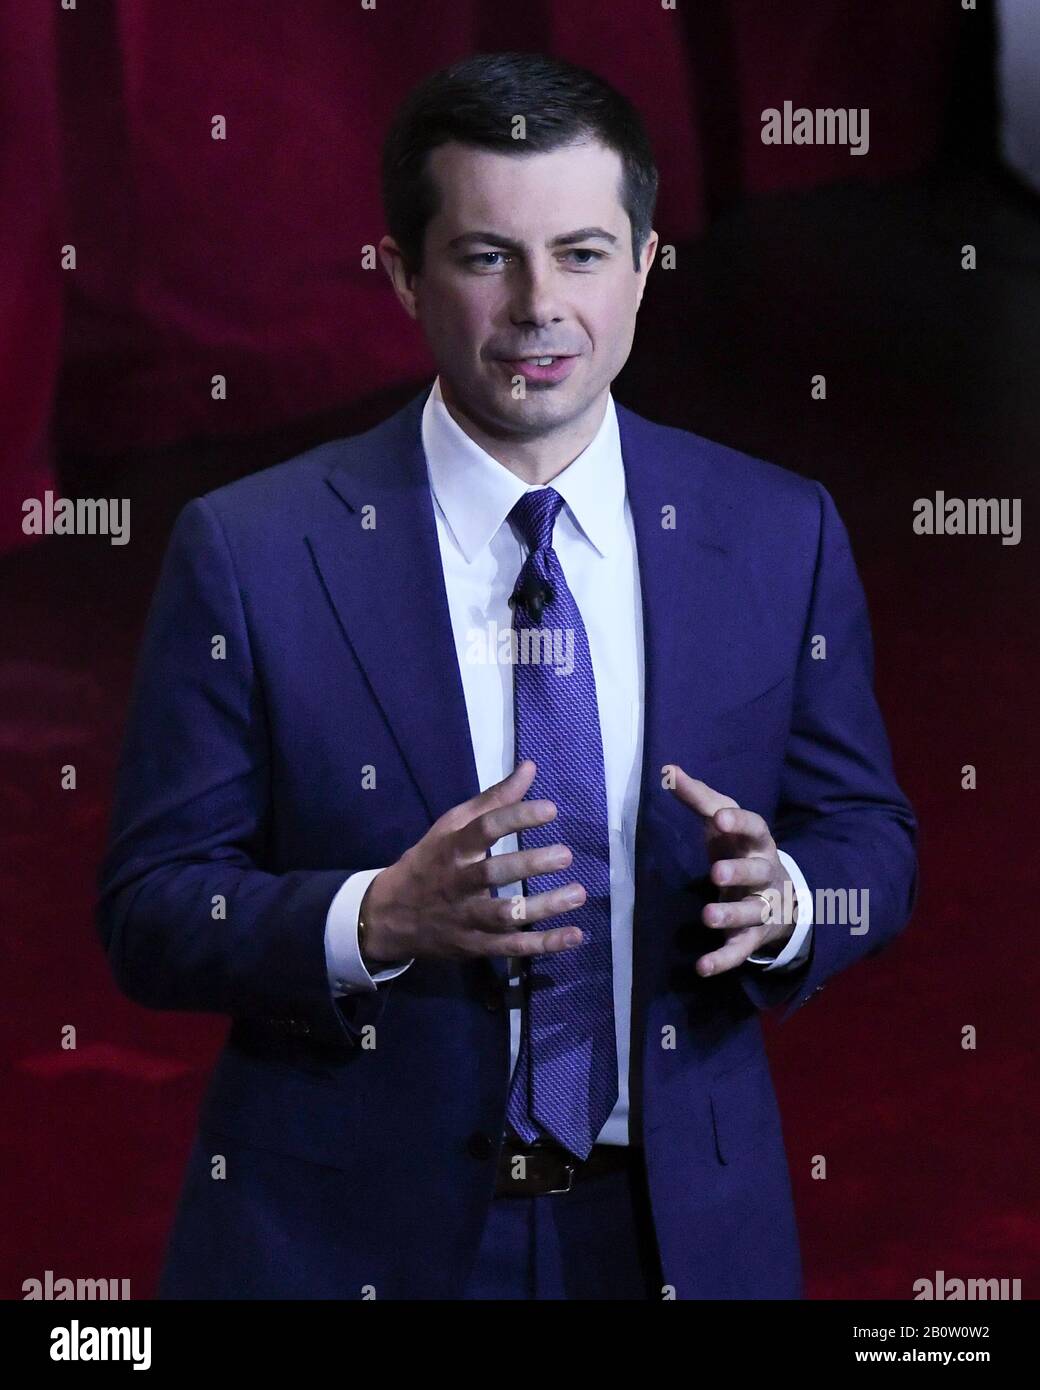 Democratic presidential candidate Pete Buttigieg on stage at Fox11 Town Hall to speak at a USC Political Assembly at Bovard Auditorium at USC on February 21, 2020 in Los Angeles, California.. Stock Photo